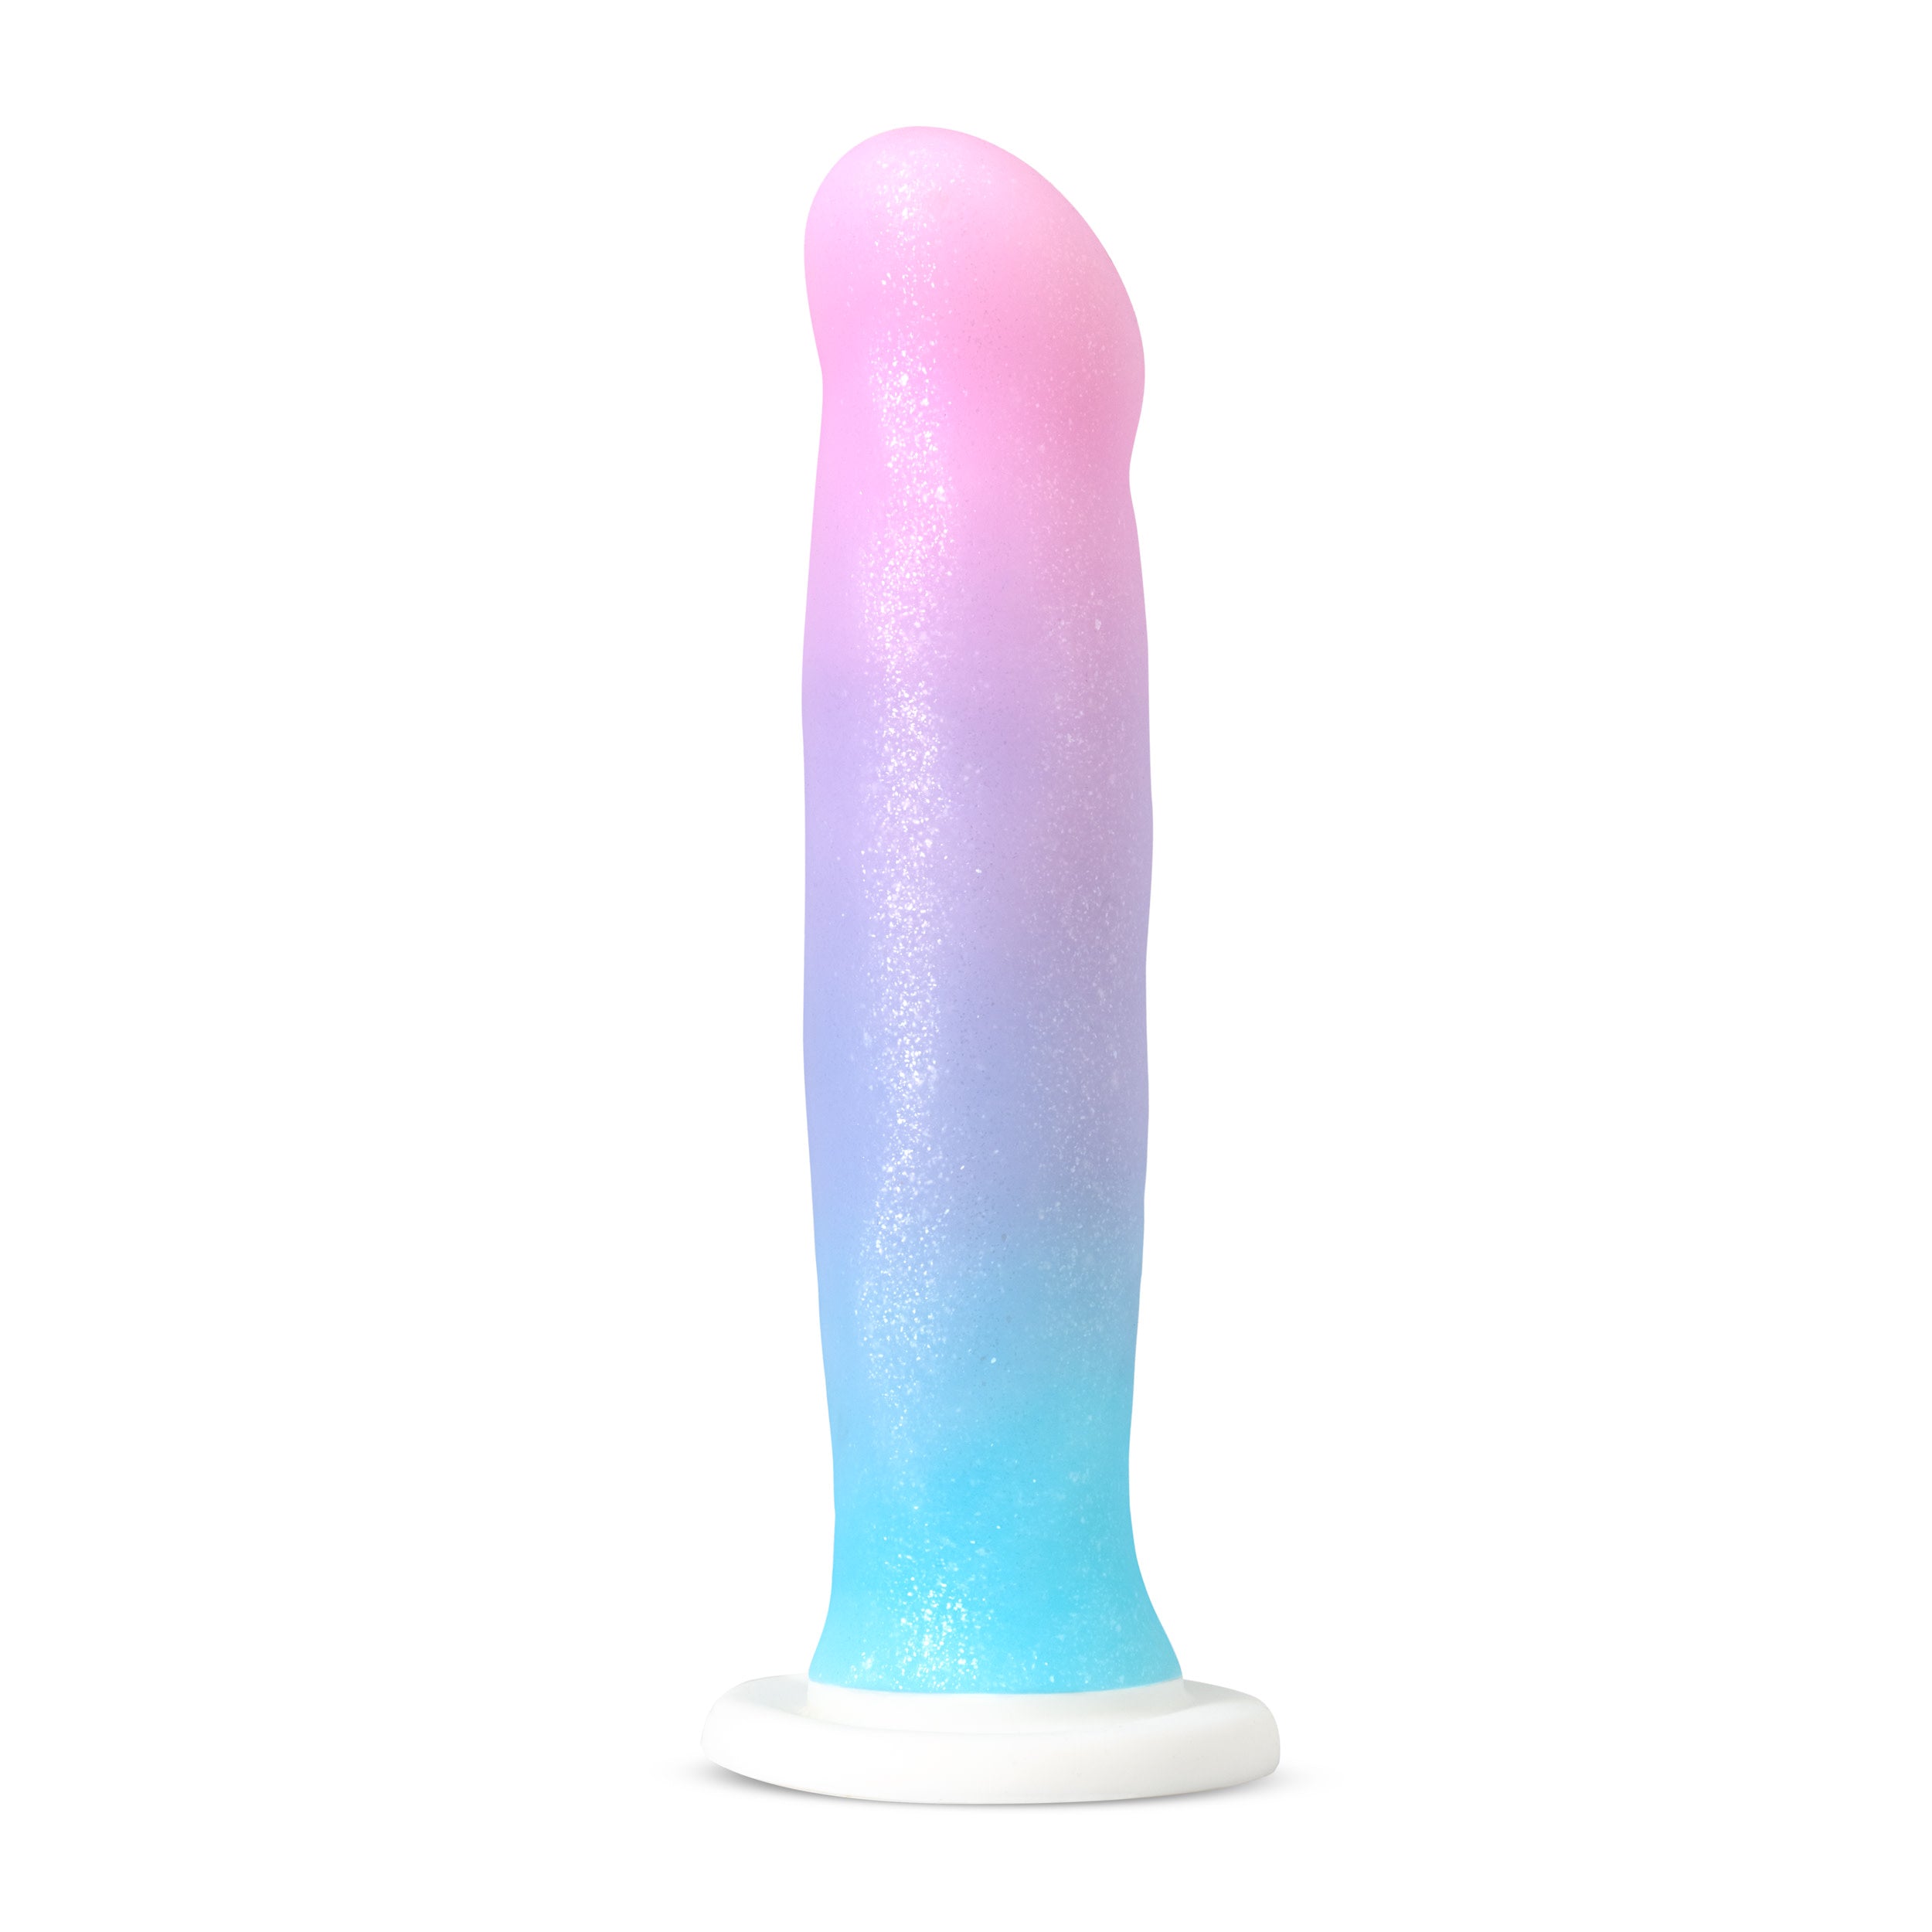 Blue, purple and pink glittery Lucky dildo